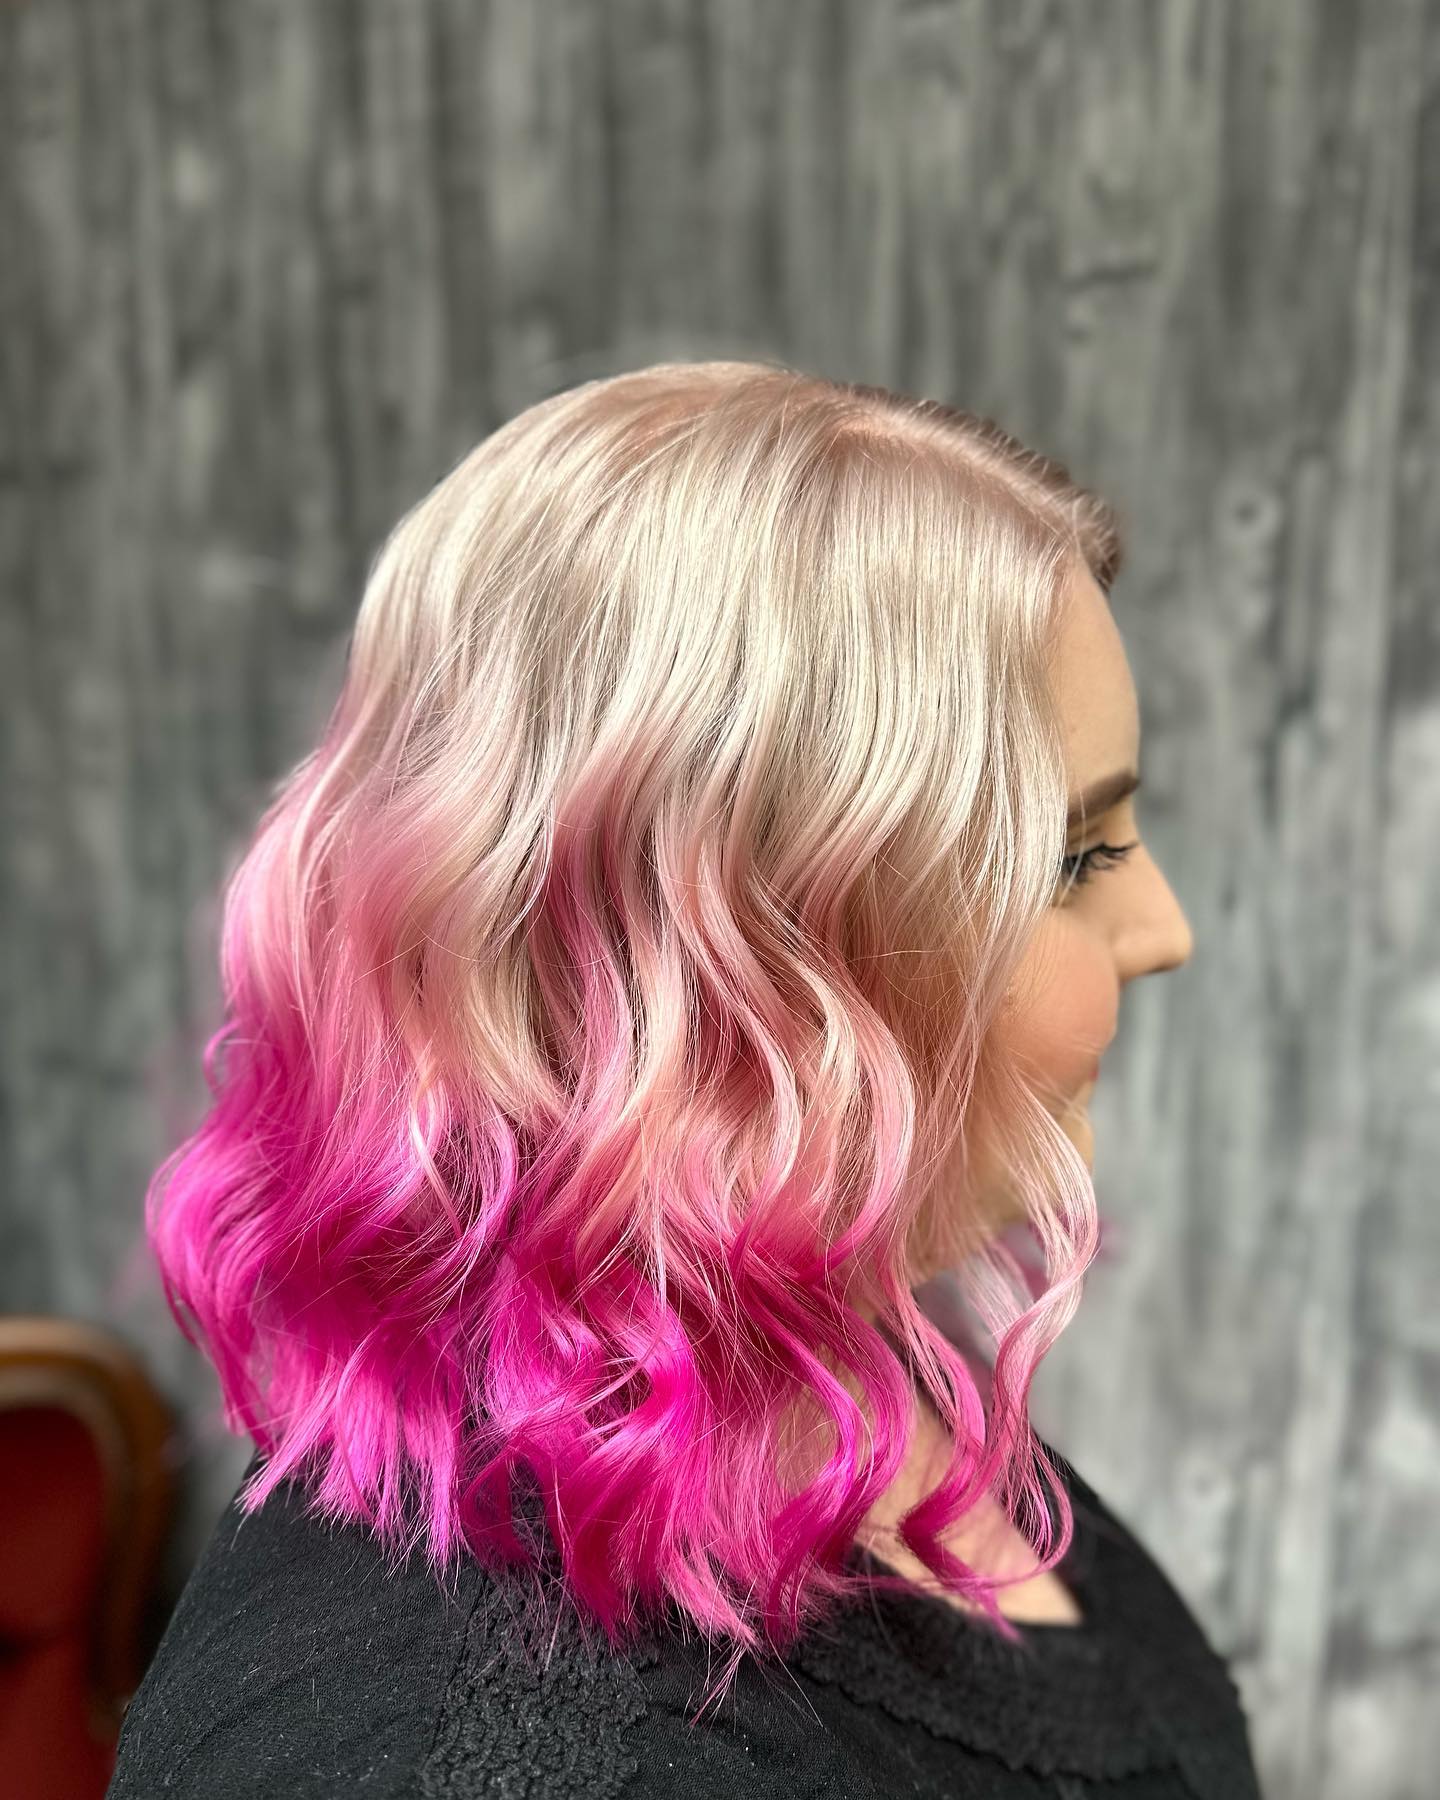 pink ombre hair color 83 Ombre pink hair blonde | Pastel pink ombre hair | Pink balayage Hair Pink Ombre Hair Color for Women